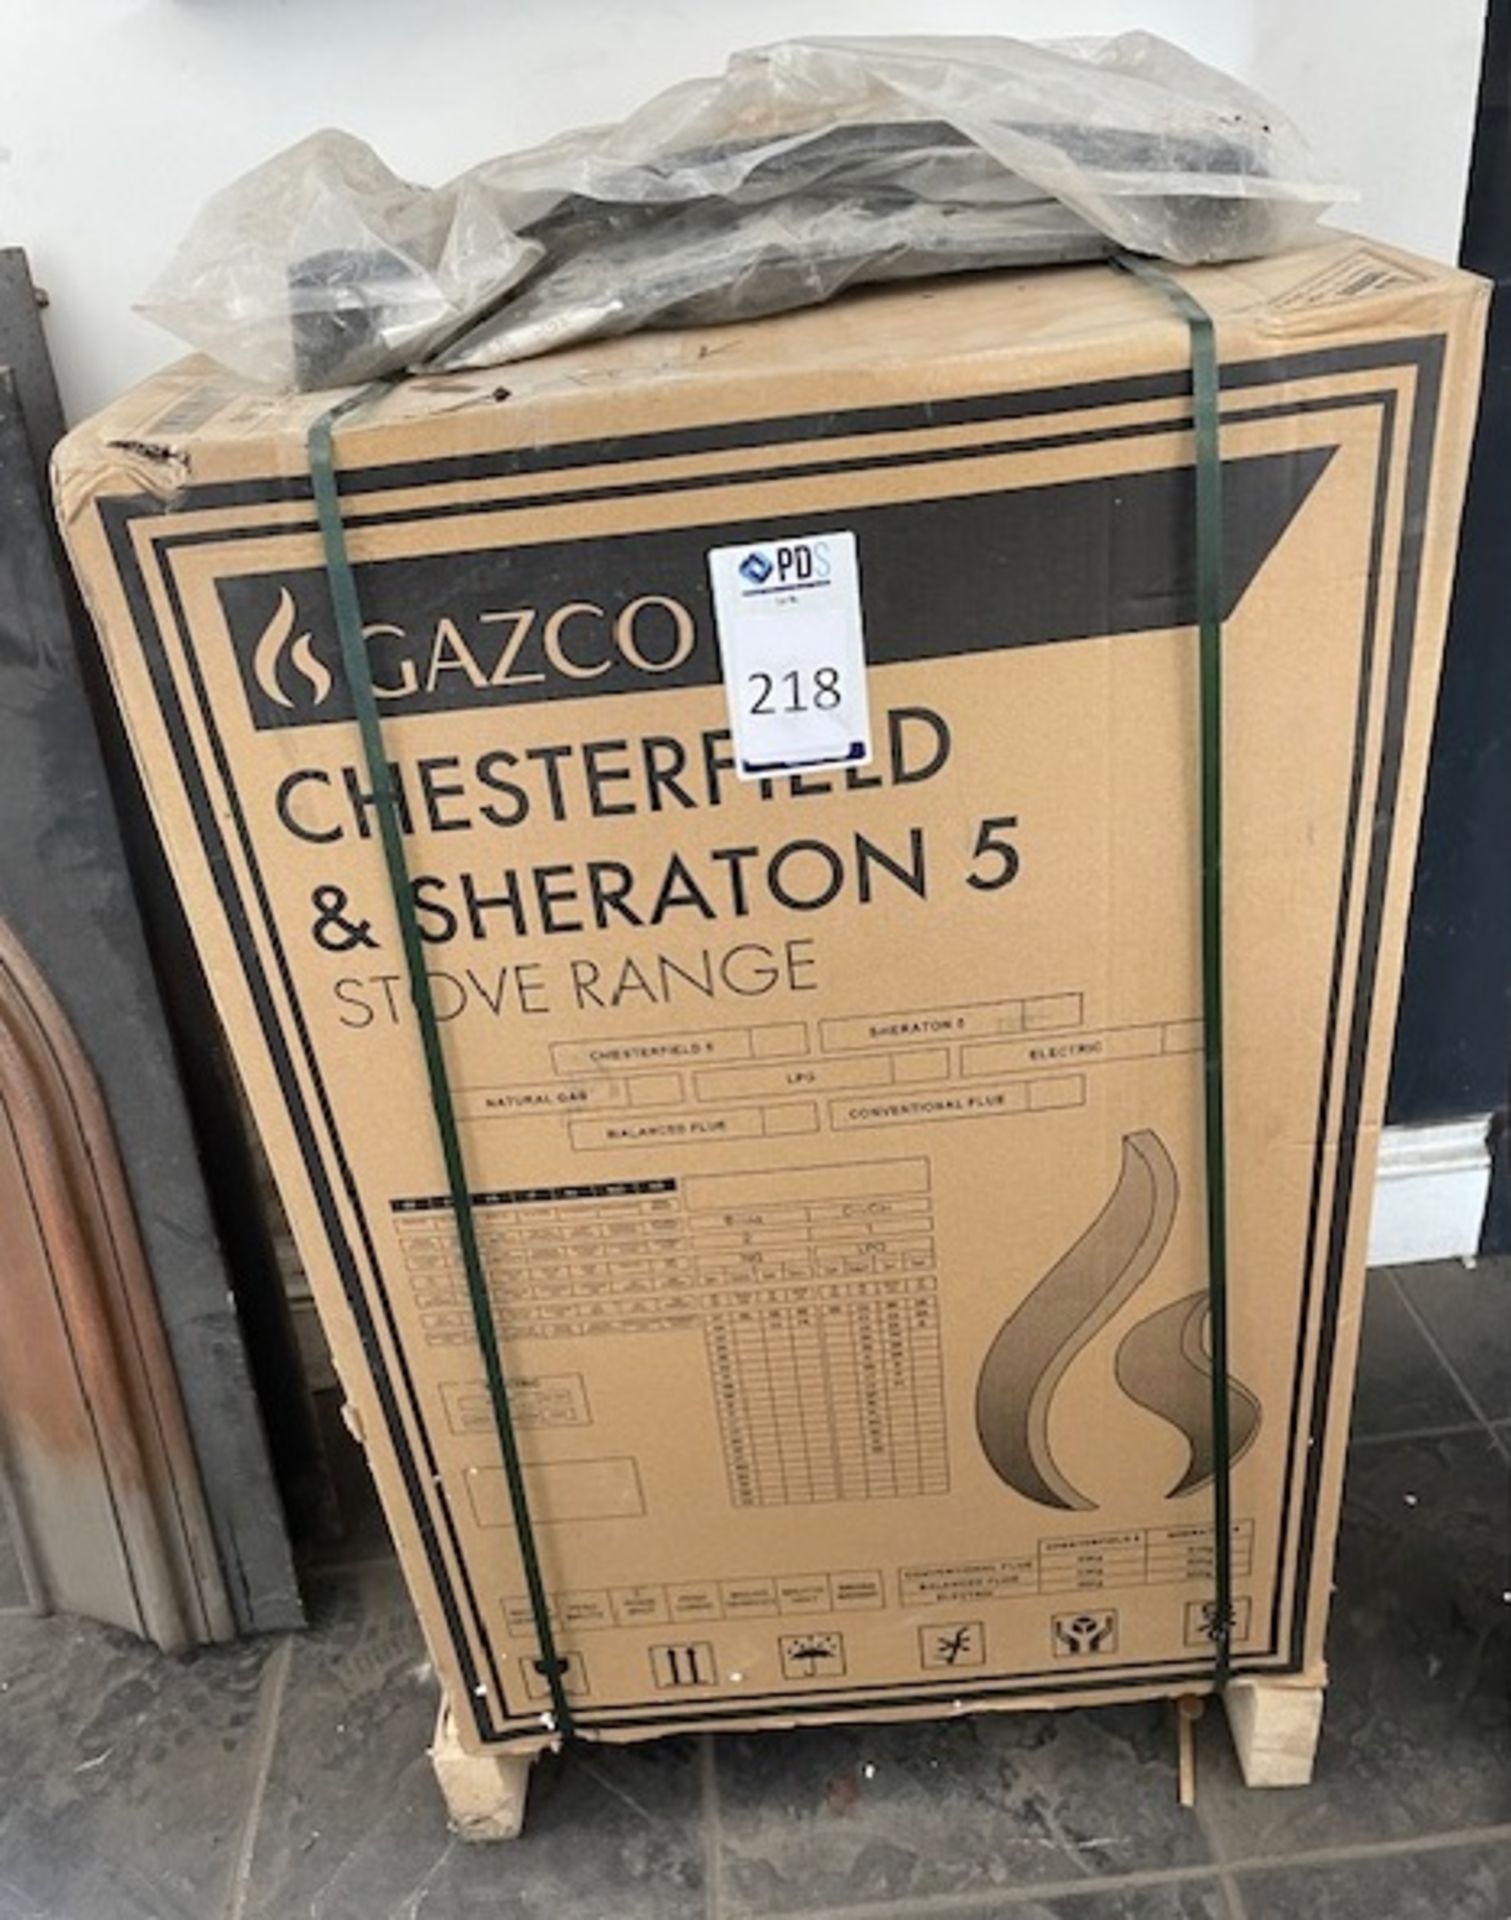 Gazco Chesterfield & Sheraton 5 Stove (Location: Romford. Please Refer to General Notes)